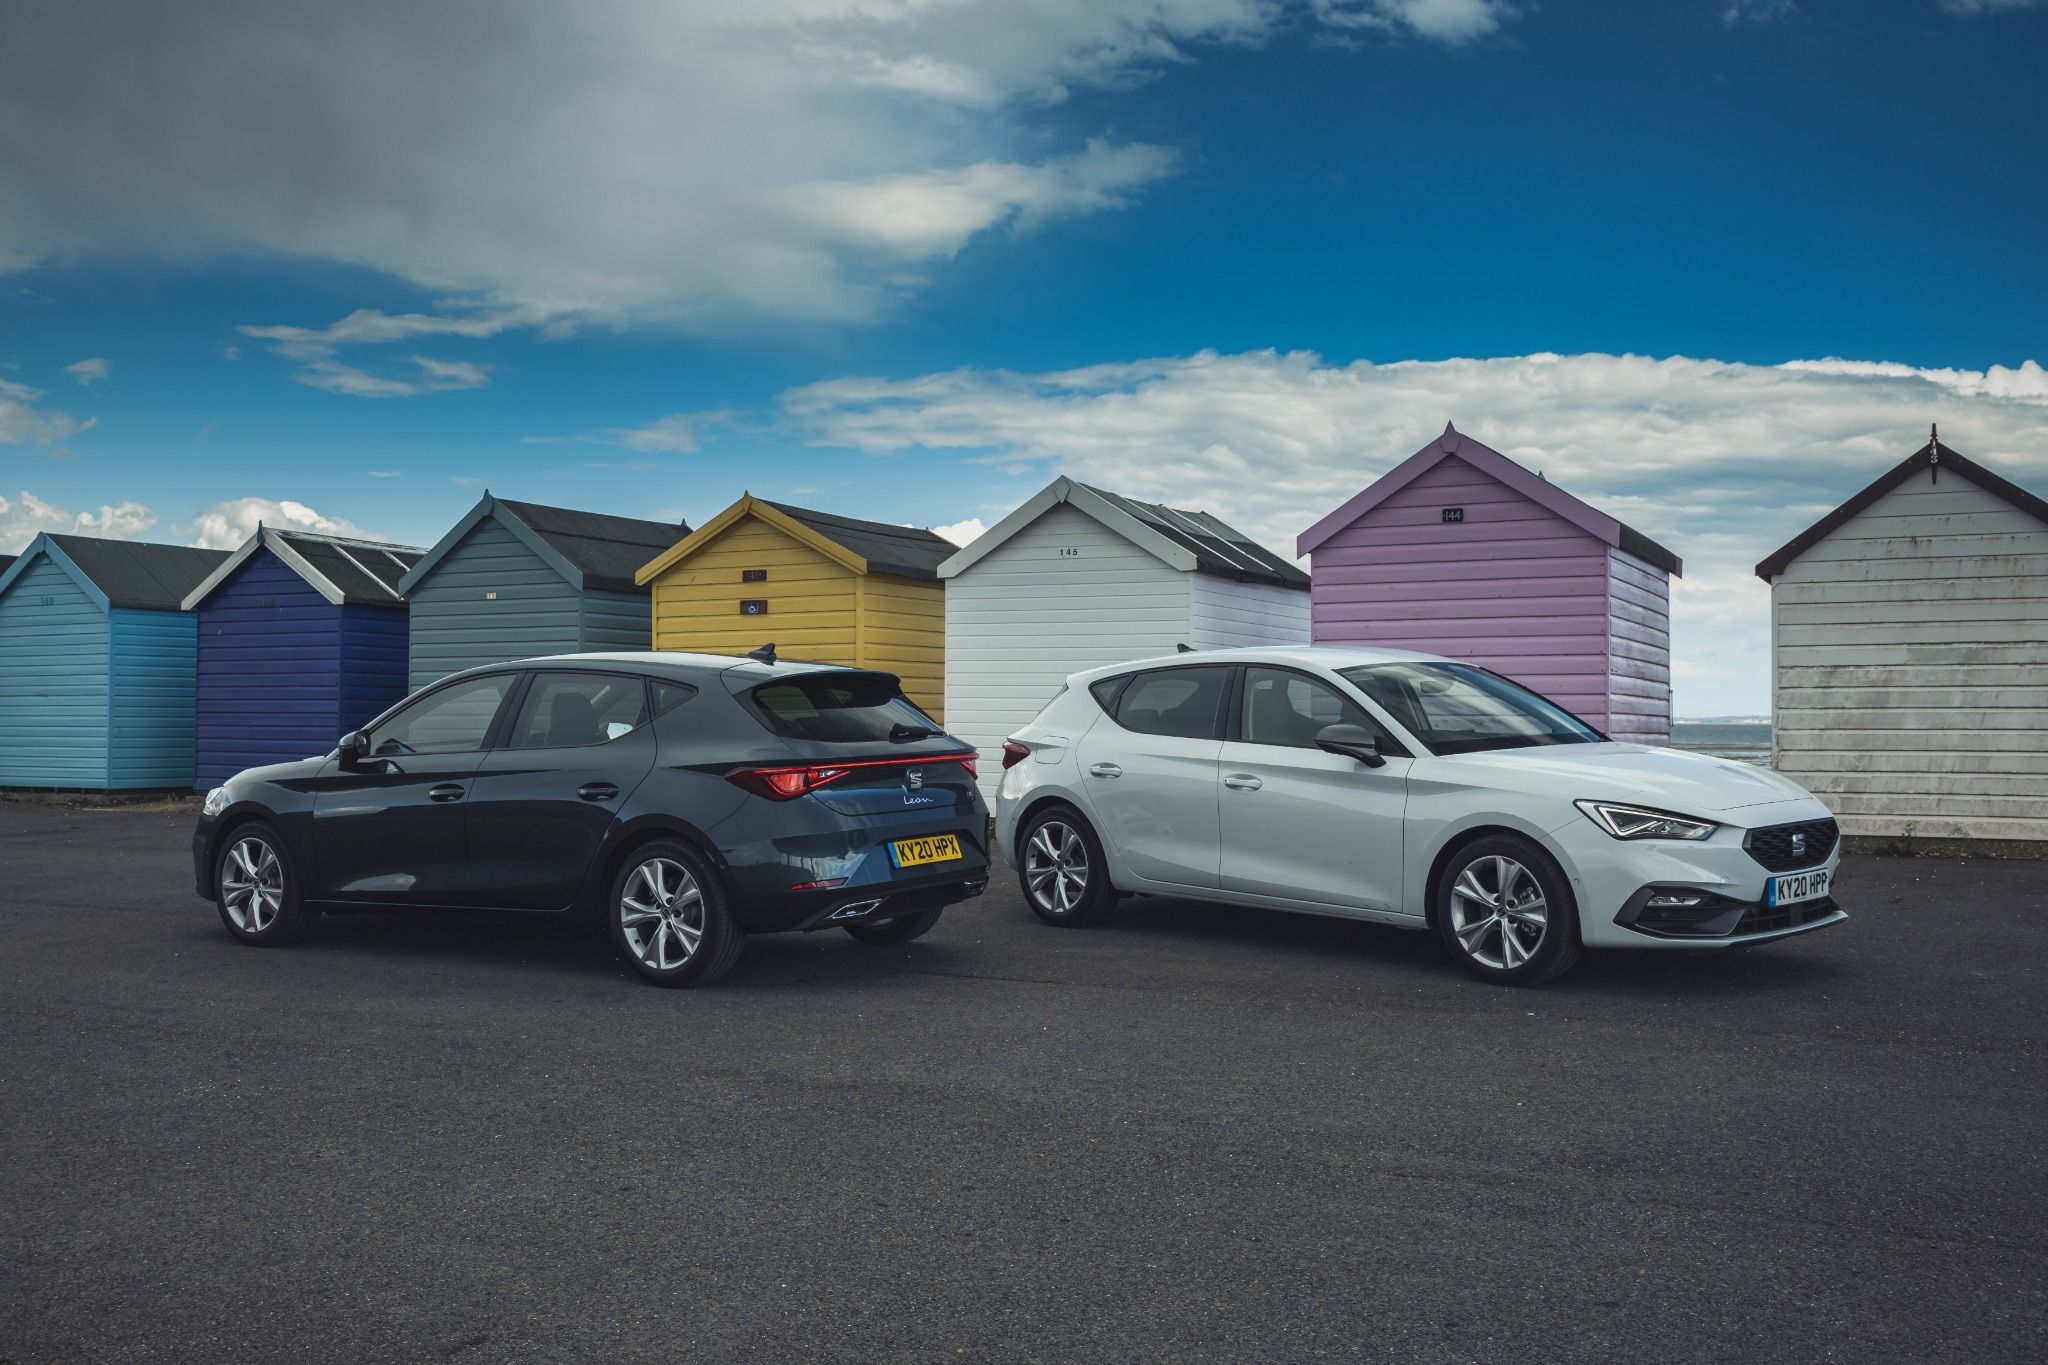 SEAT Leon FR parked by beach huts